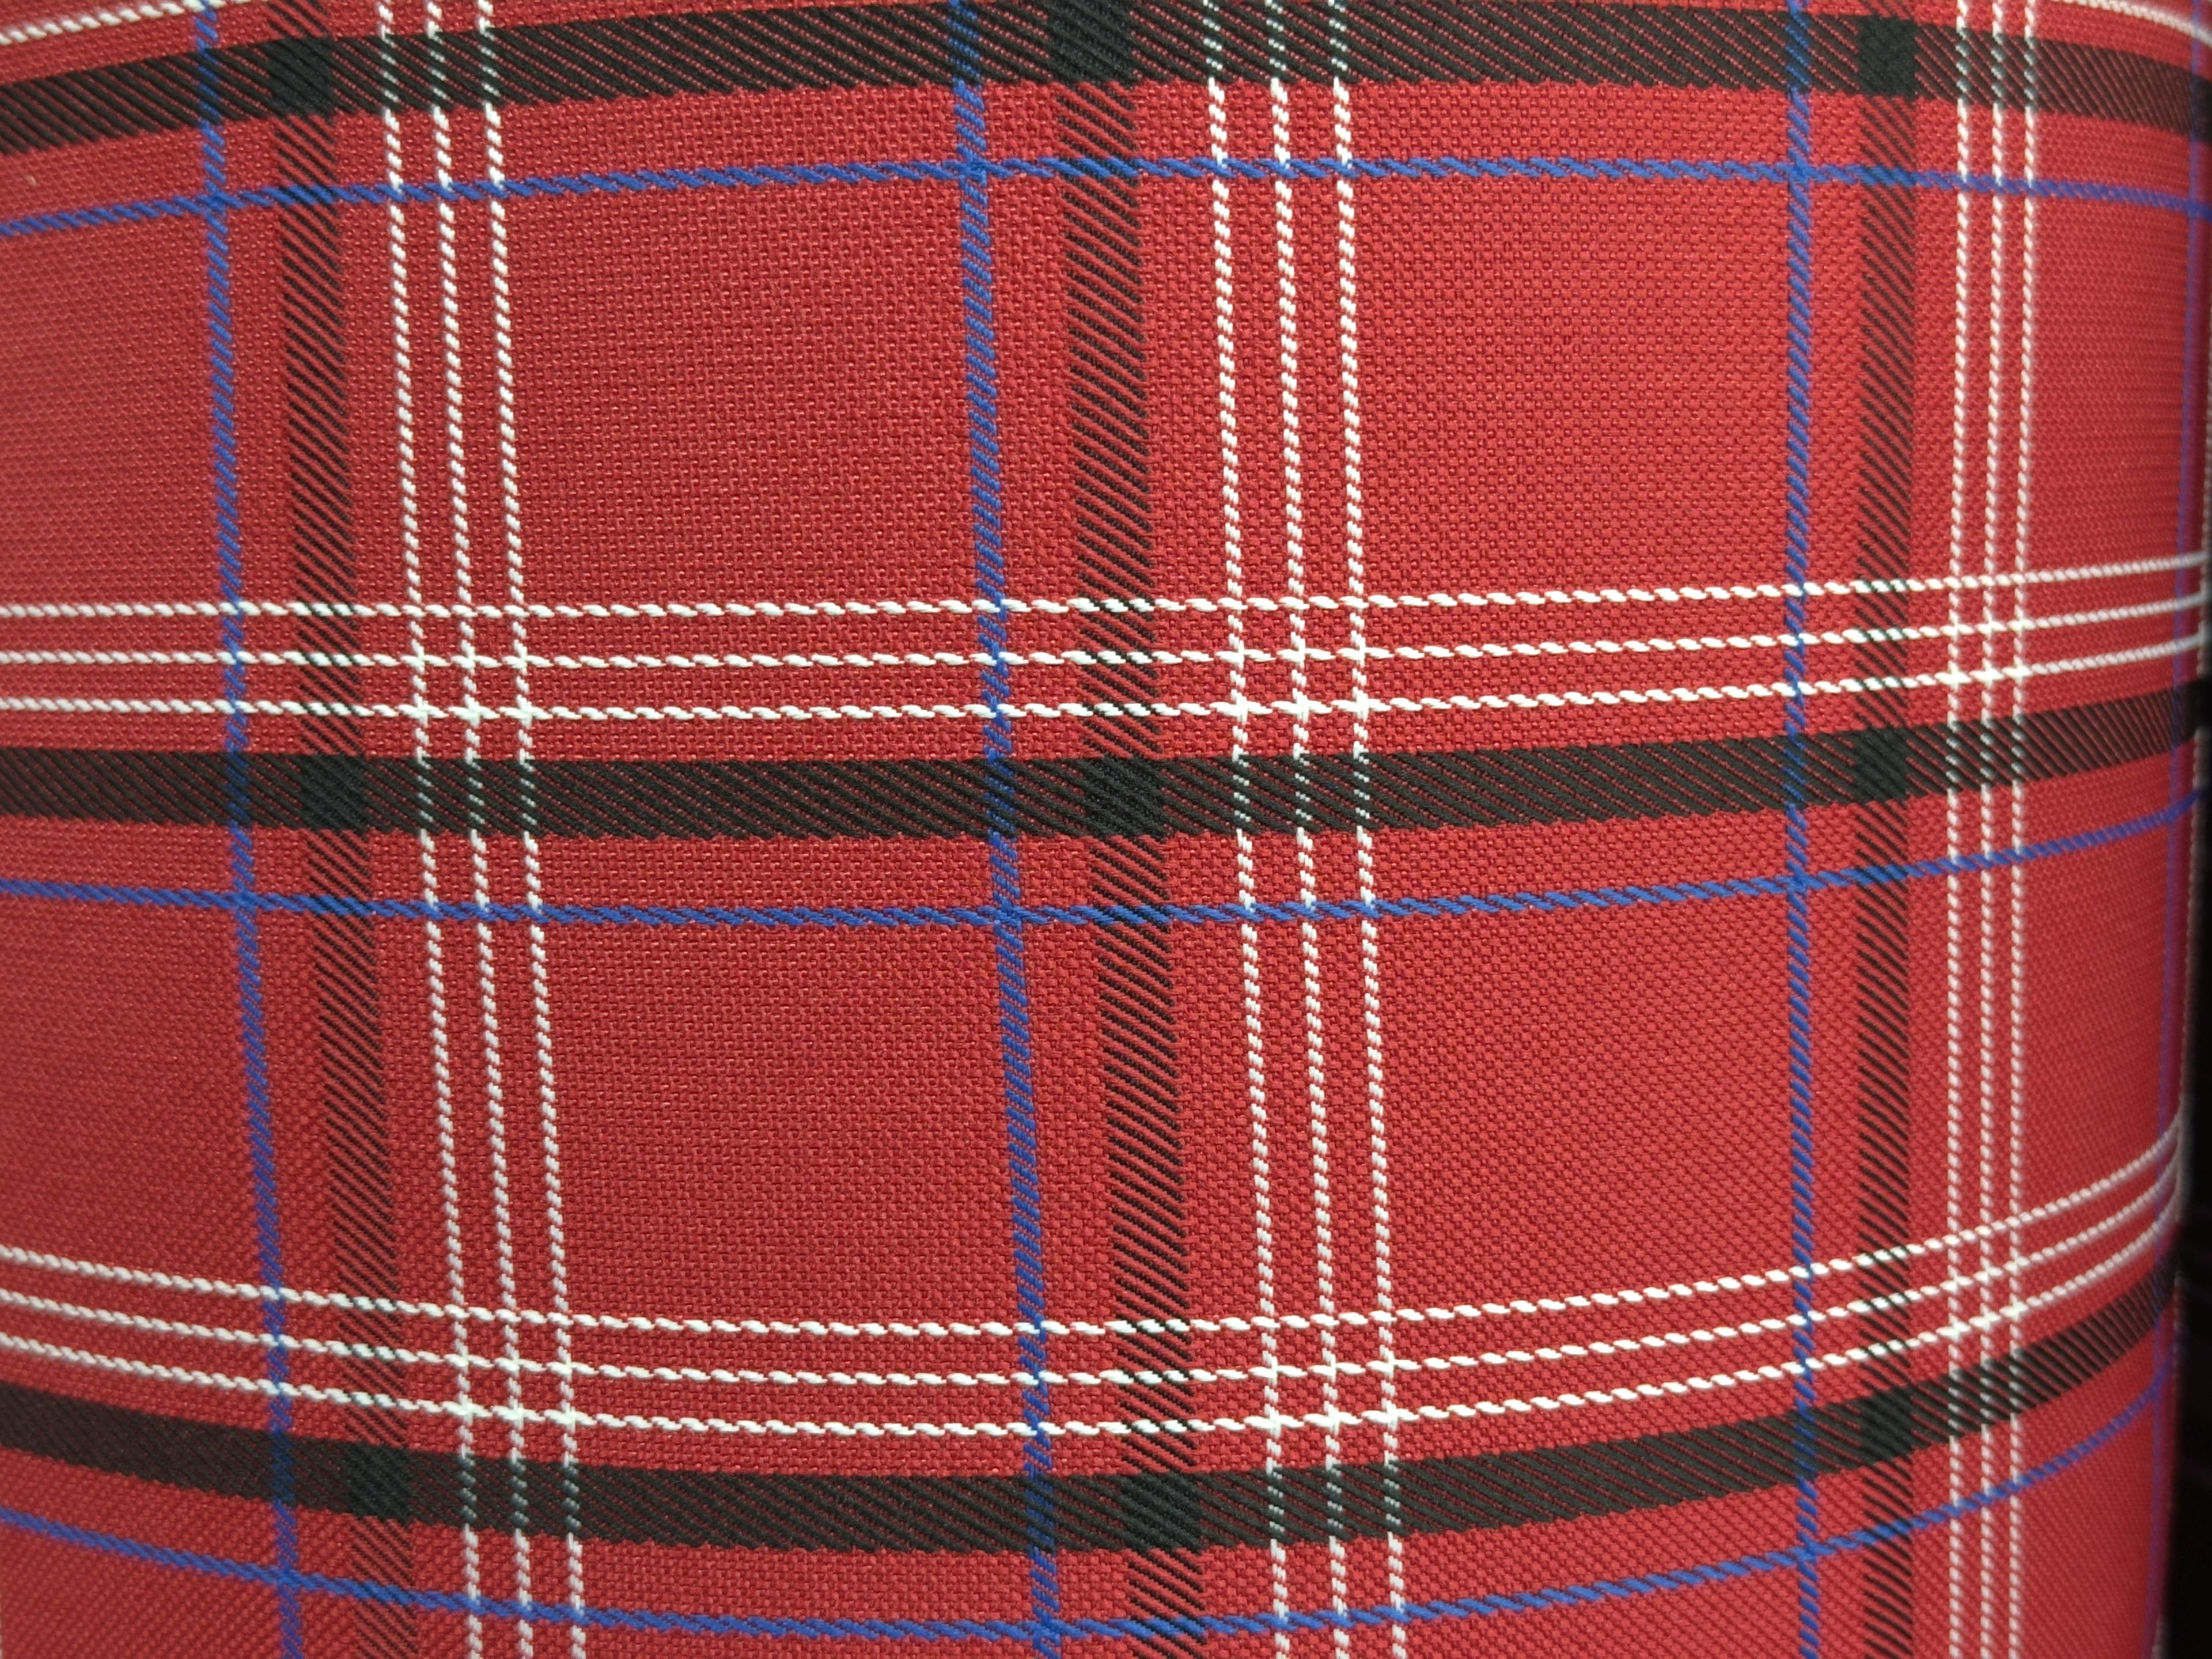 GTI Red Blue Plaid Car Upholstery Fabric - VW Golf MK7- 3.5mm Comfort Foam - 59" - 150CM - Tartan Chic - Ideal for Seat, Interior, Automobile